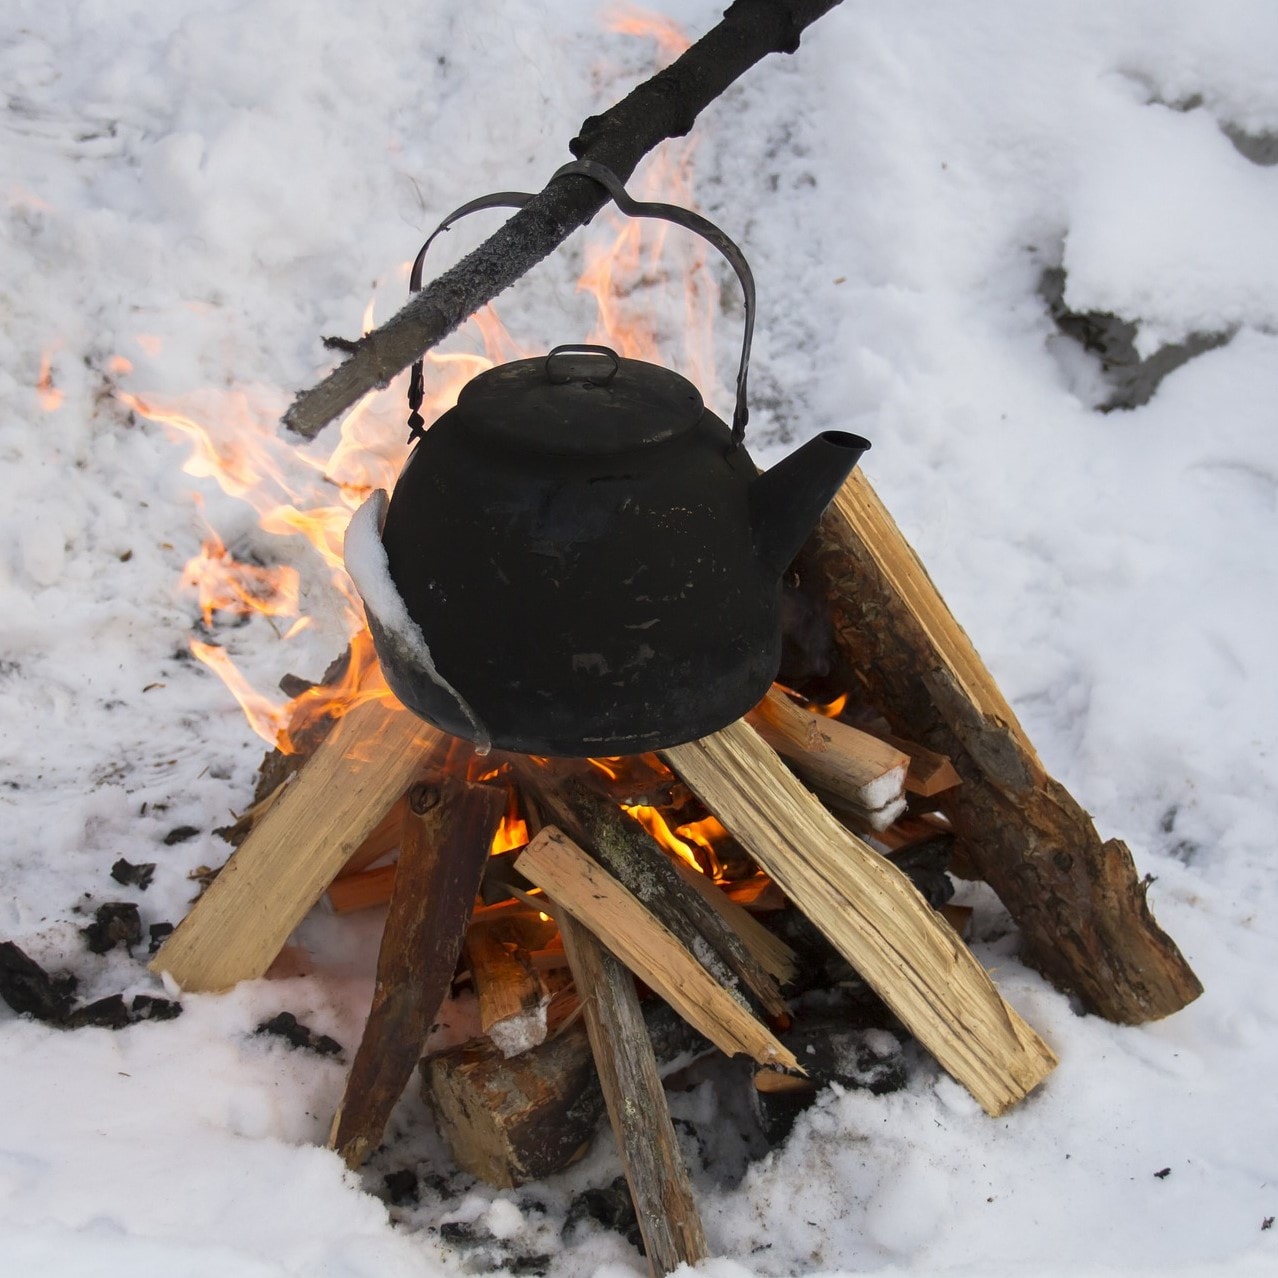 Using Fire and a Cooker in the Winter